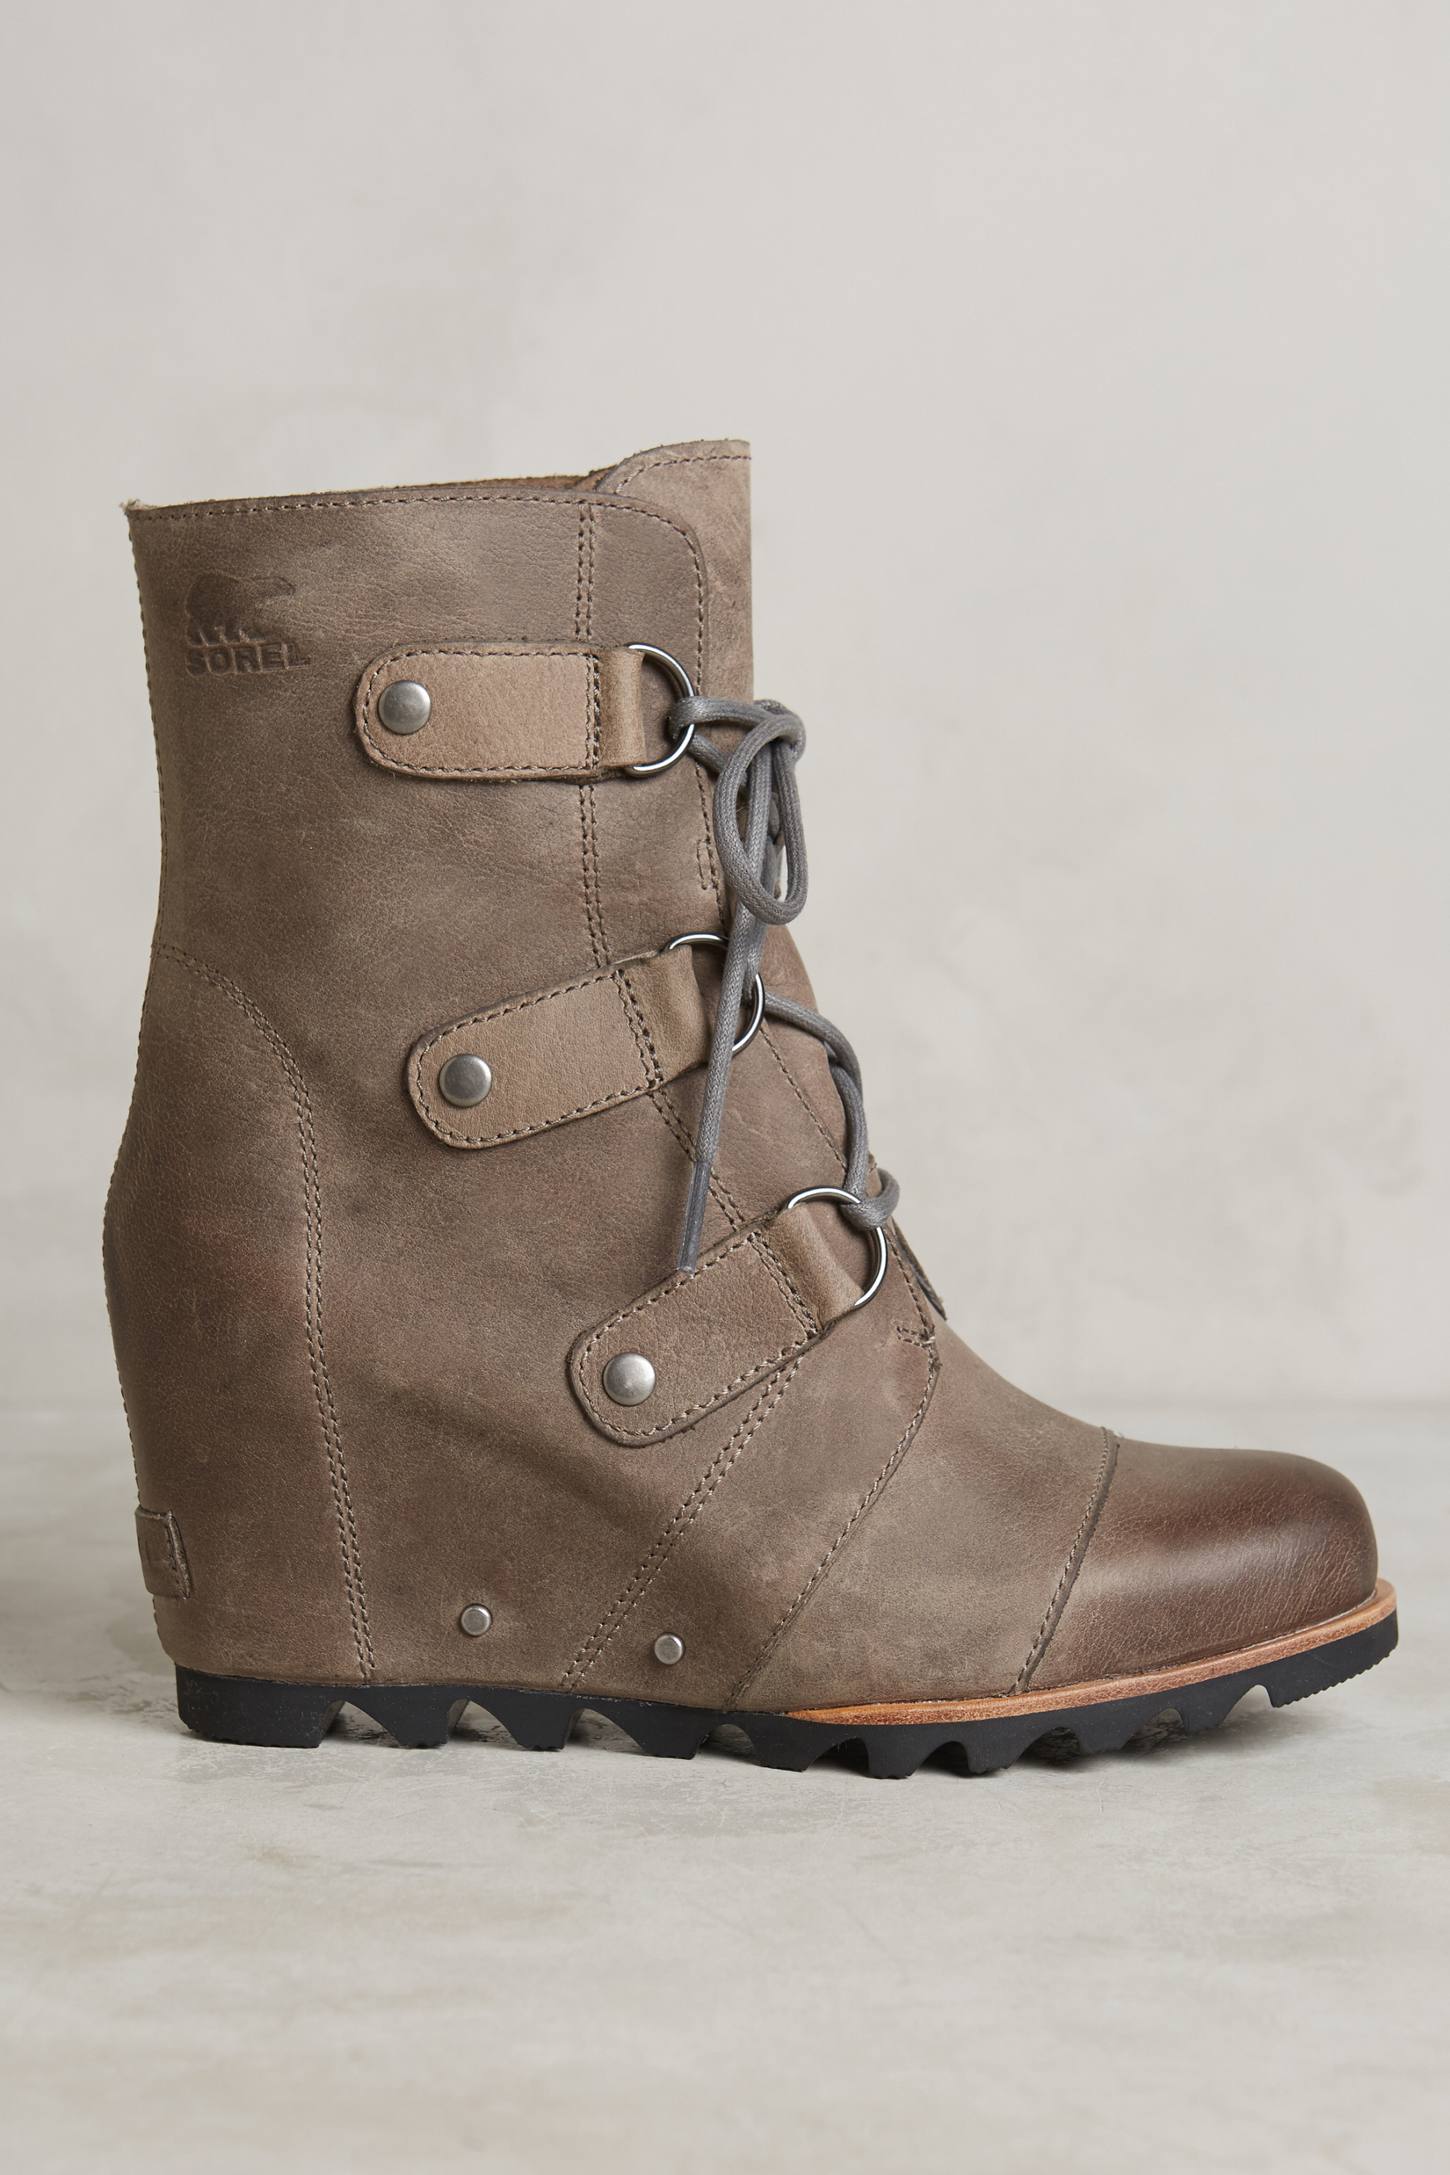 Sorel Joan of Arctic Wedge Ankle Boots | Anthropologie